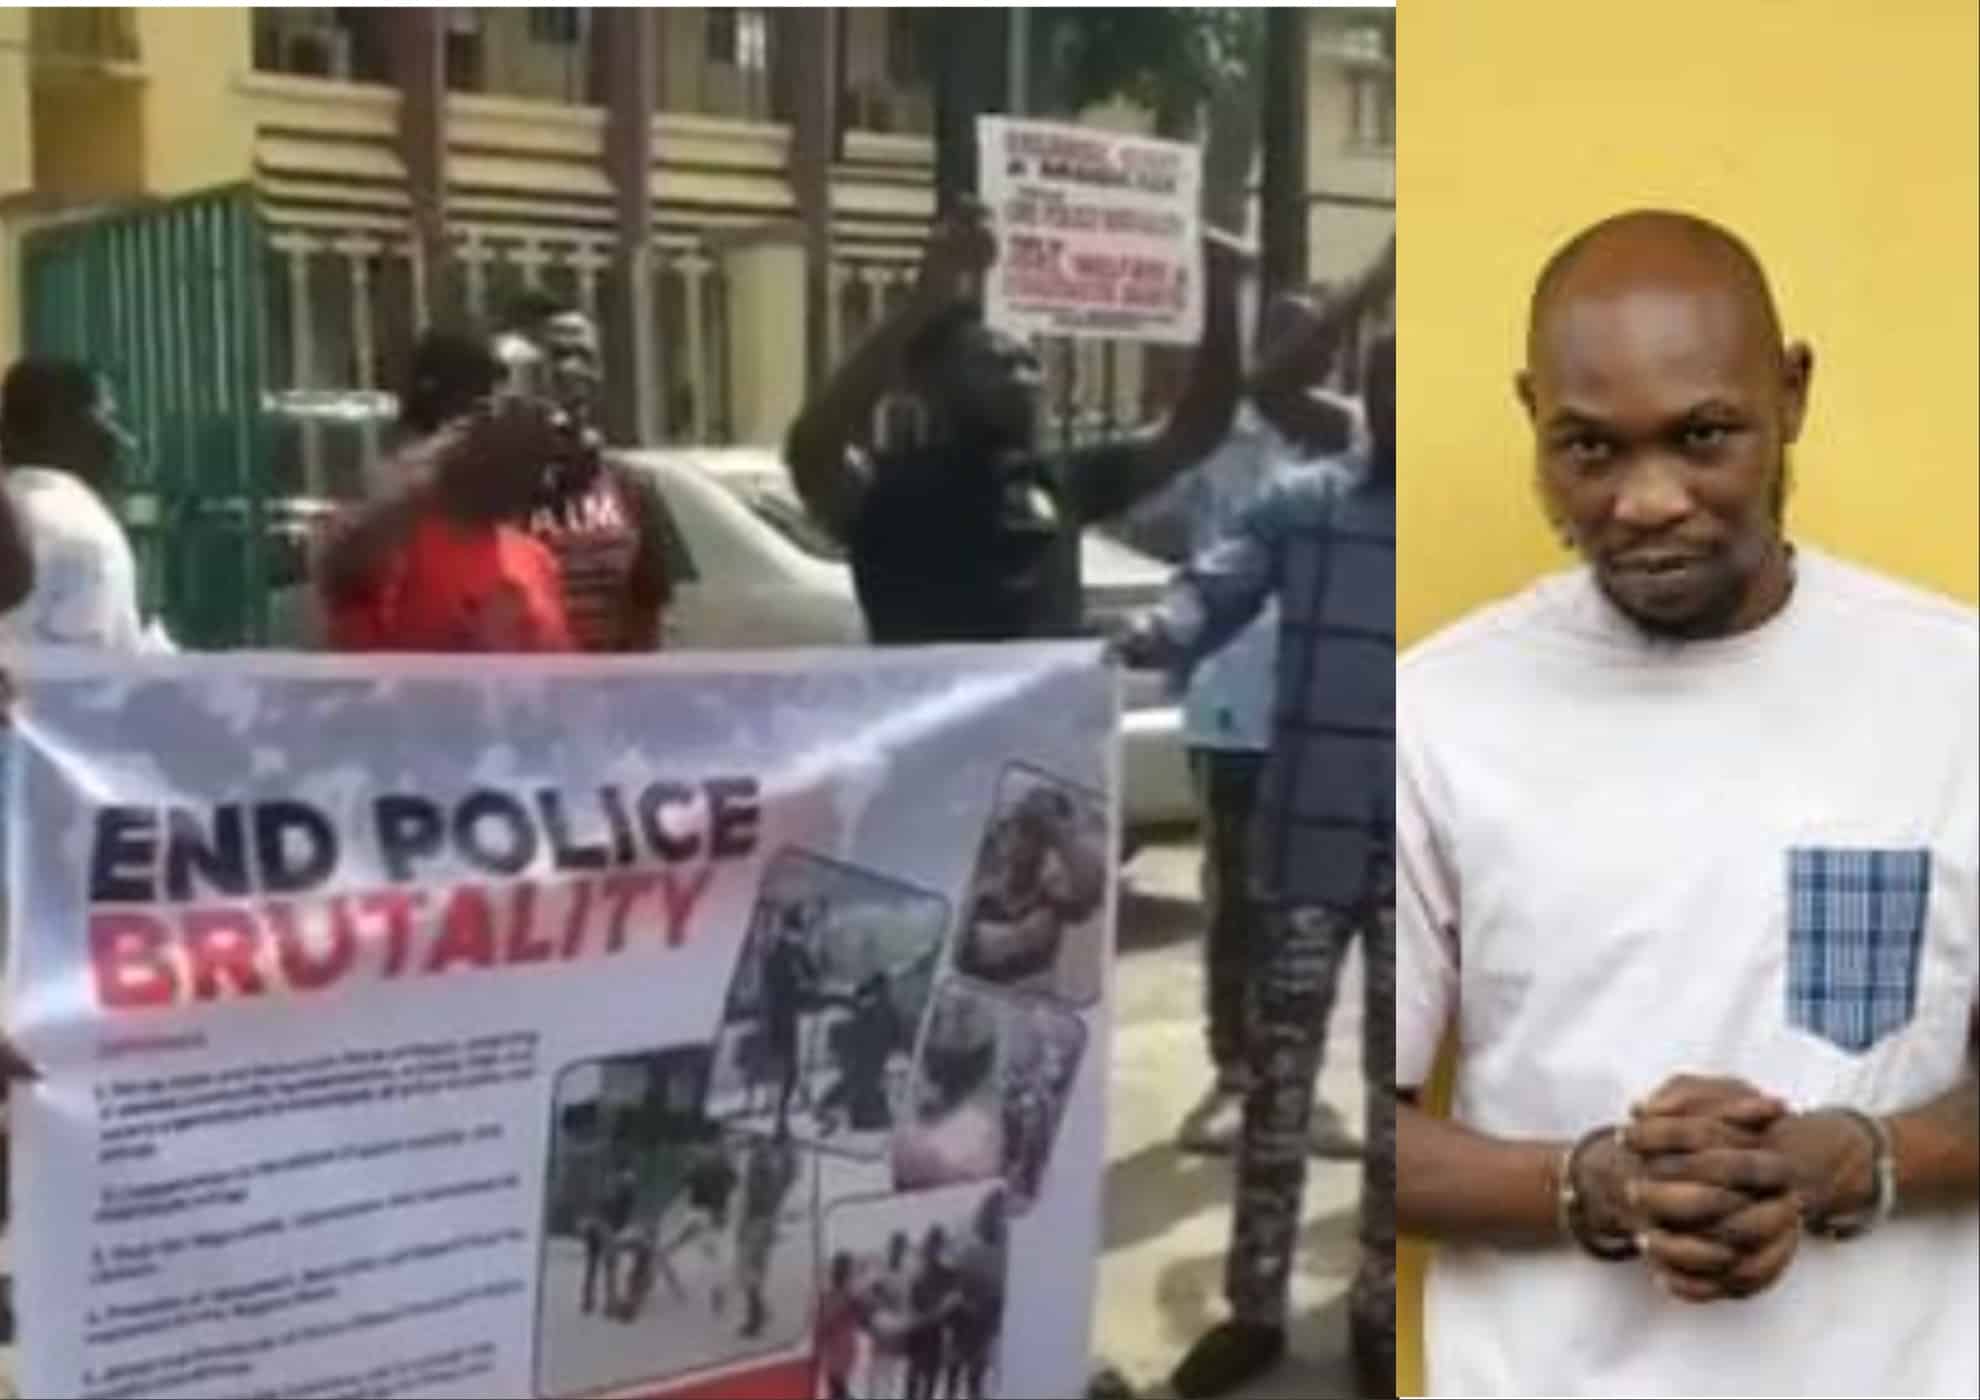 Seun Kuti’s Trial Adjourned Amidst Protests for Release: Calls for Justice Intensify